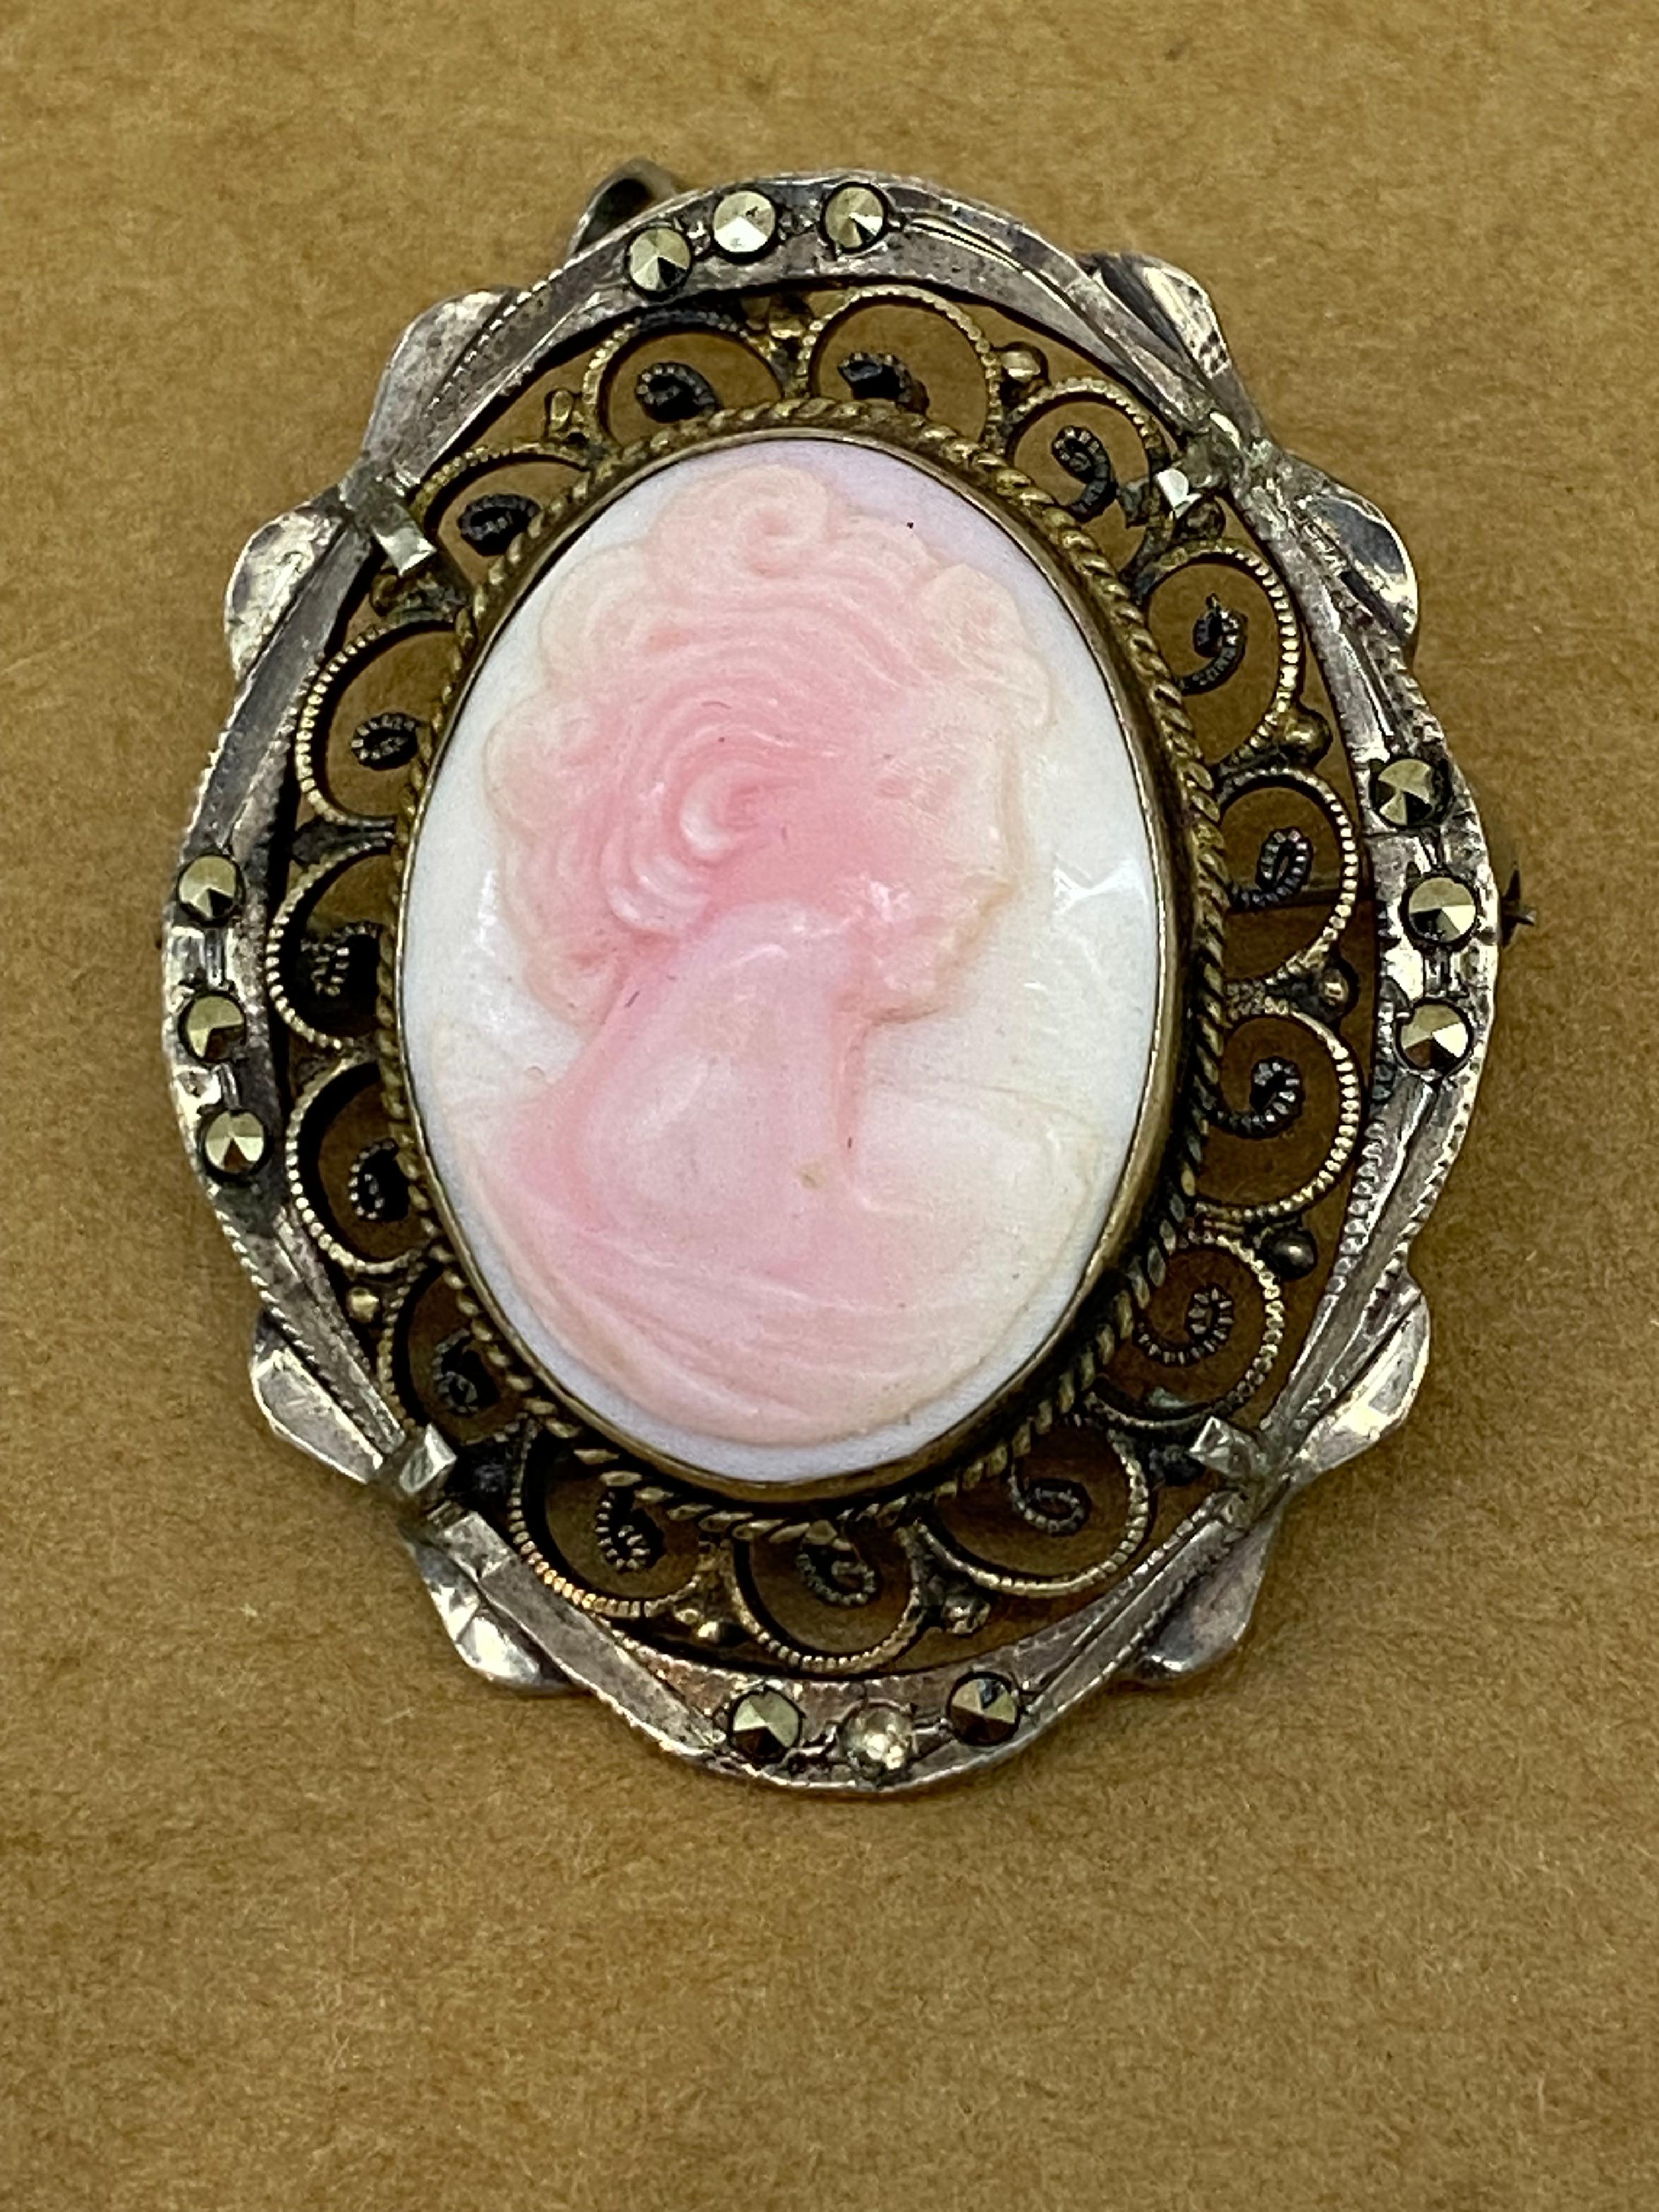 This Vintage Finely Carved Pinkish White Coral Brooch 

is depicting a profile of a young lady, 

incredibly detailed, 

within a 925 Sterling Silver finely detailed decorative border,

adorned with marcasites 

 

It has a pin & a bail - provision